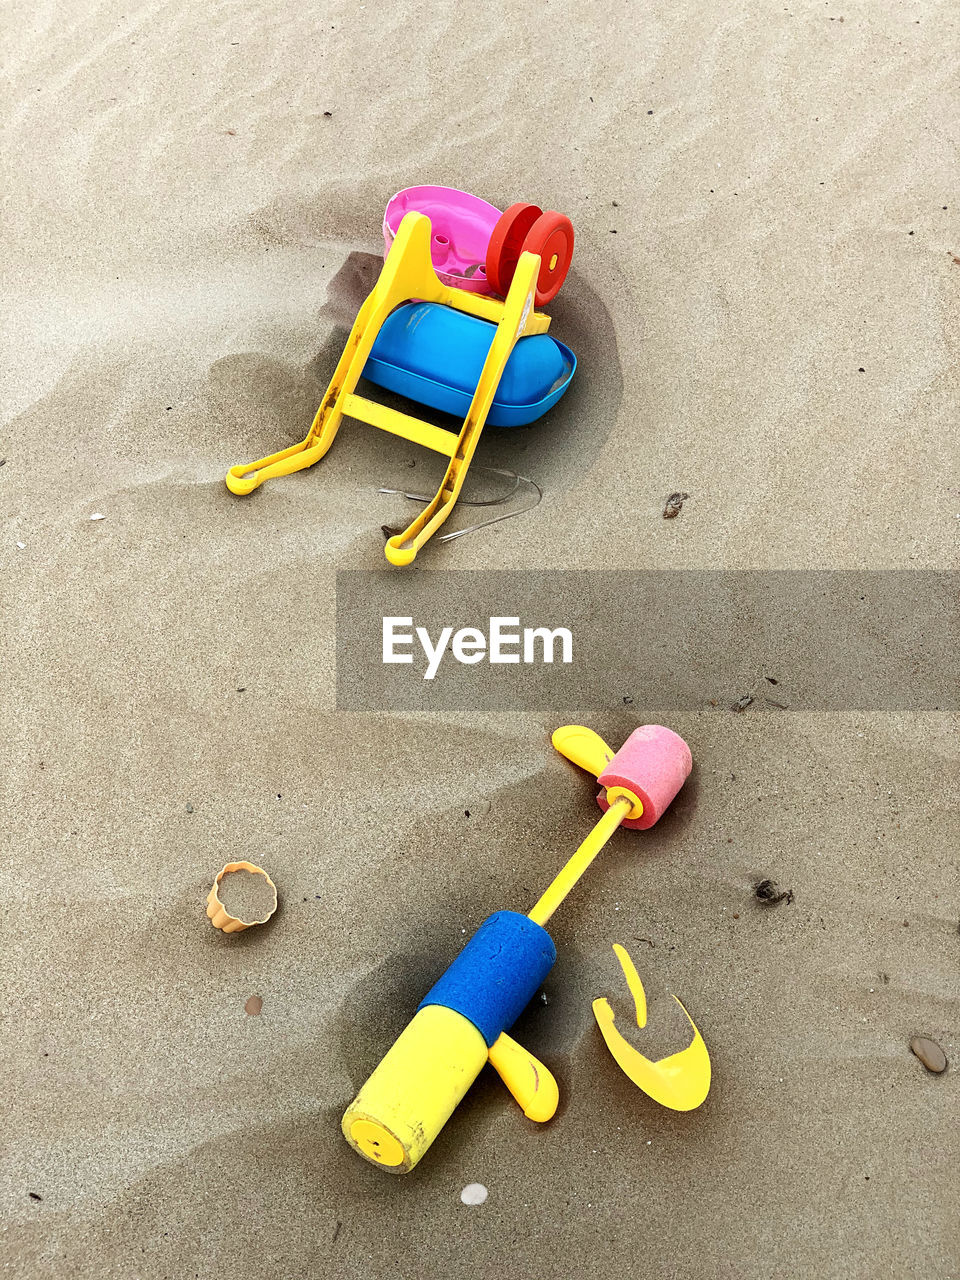 HIGH ANGLE VIEW OF PLASTIC TOY ON SAND